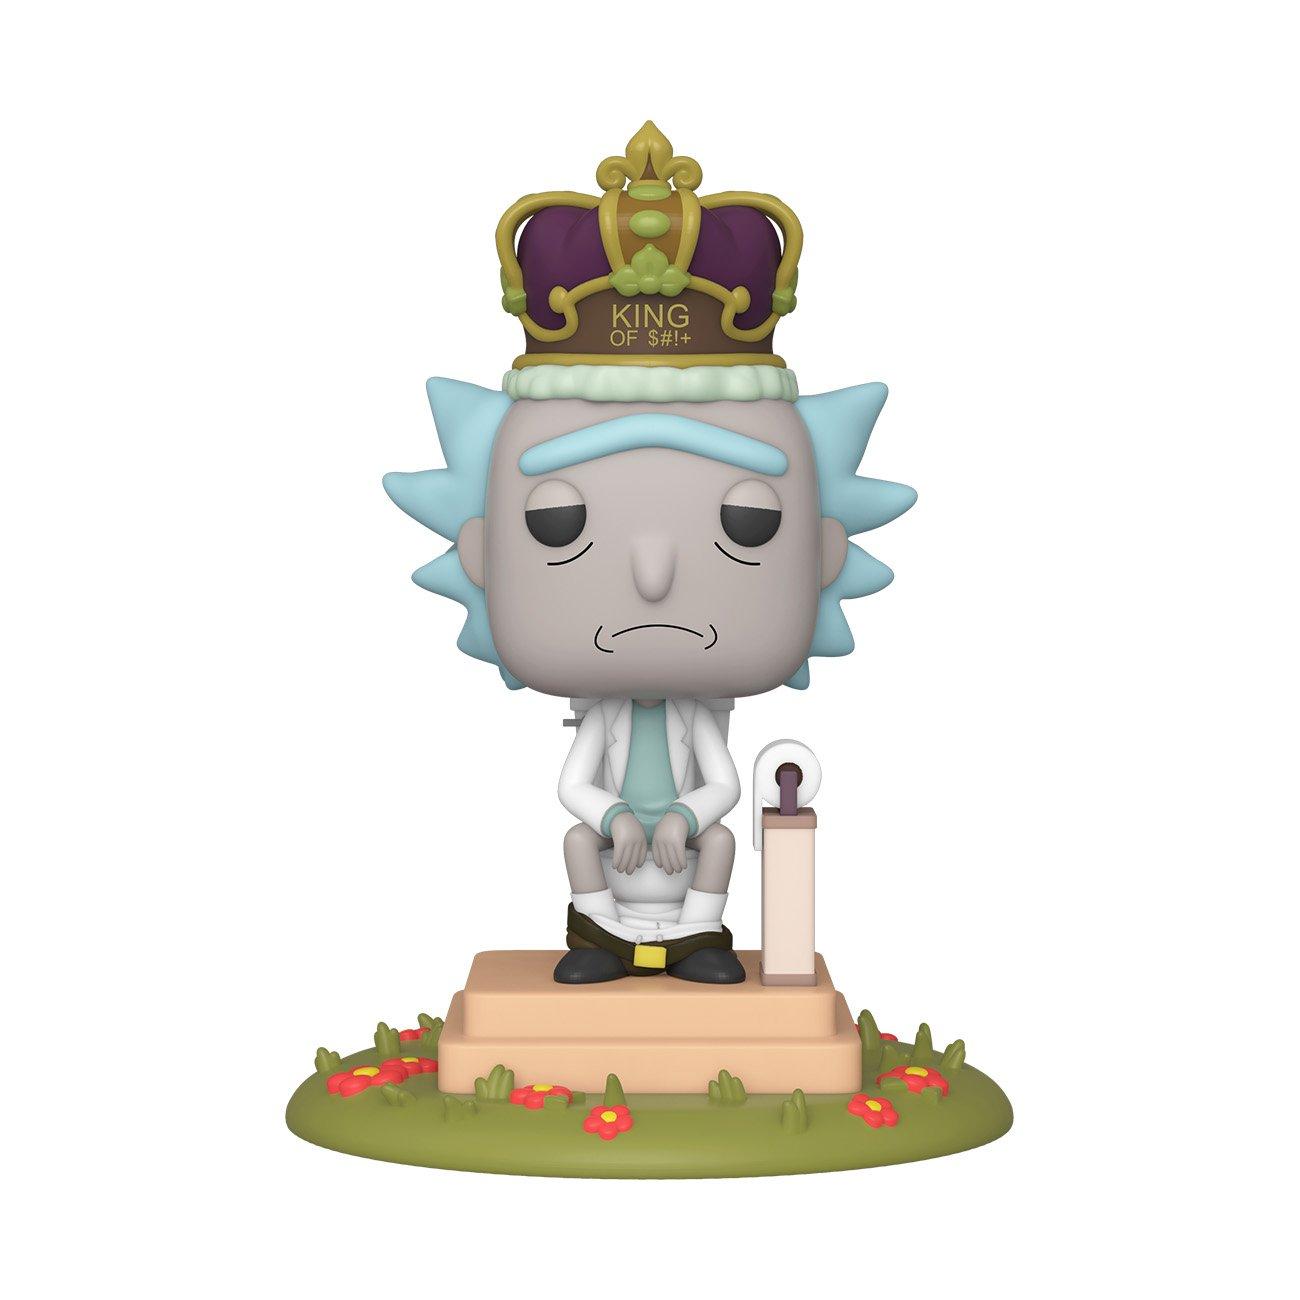 POP! Deluxe: Rick and Morty King of ShXt with Sound